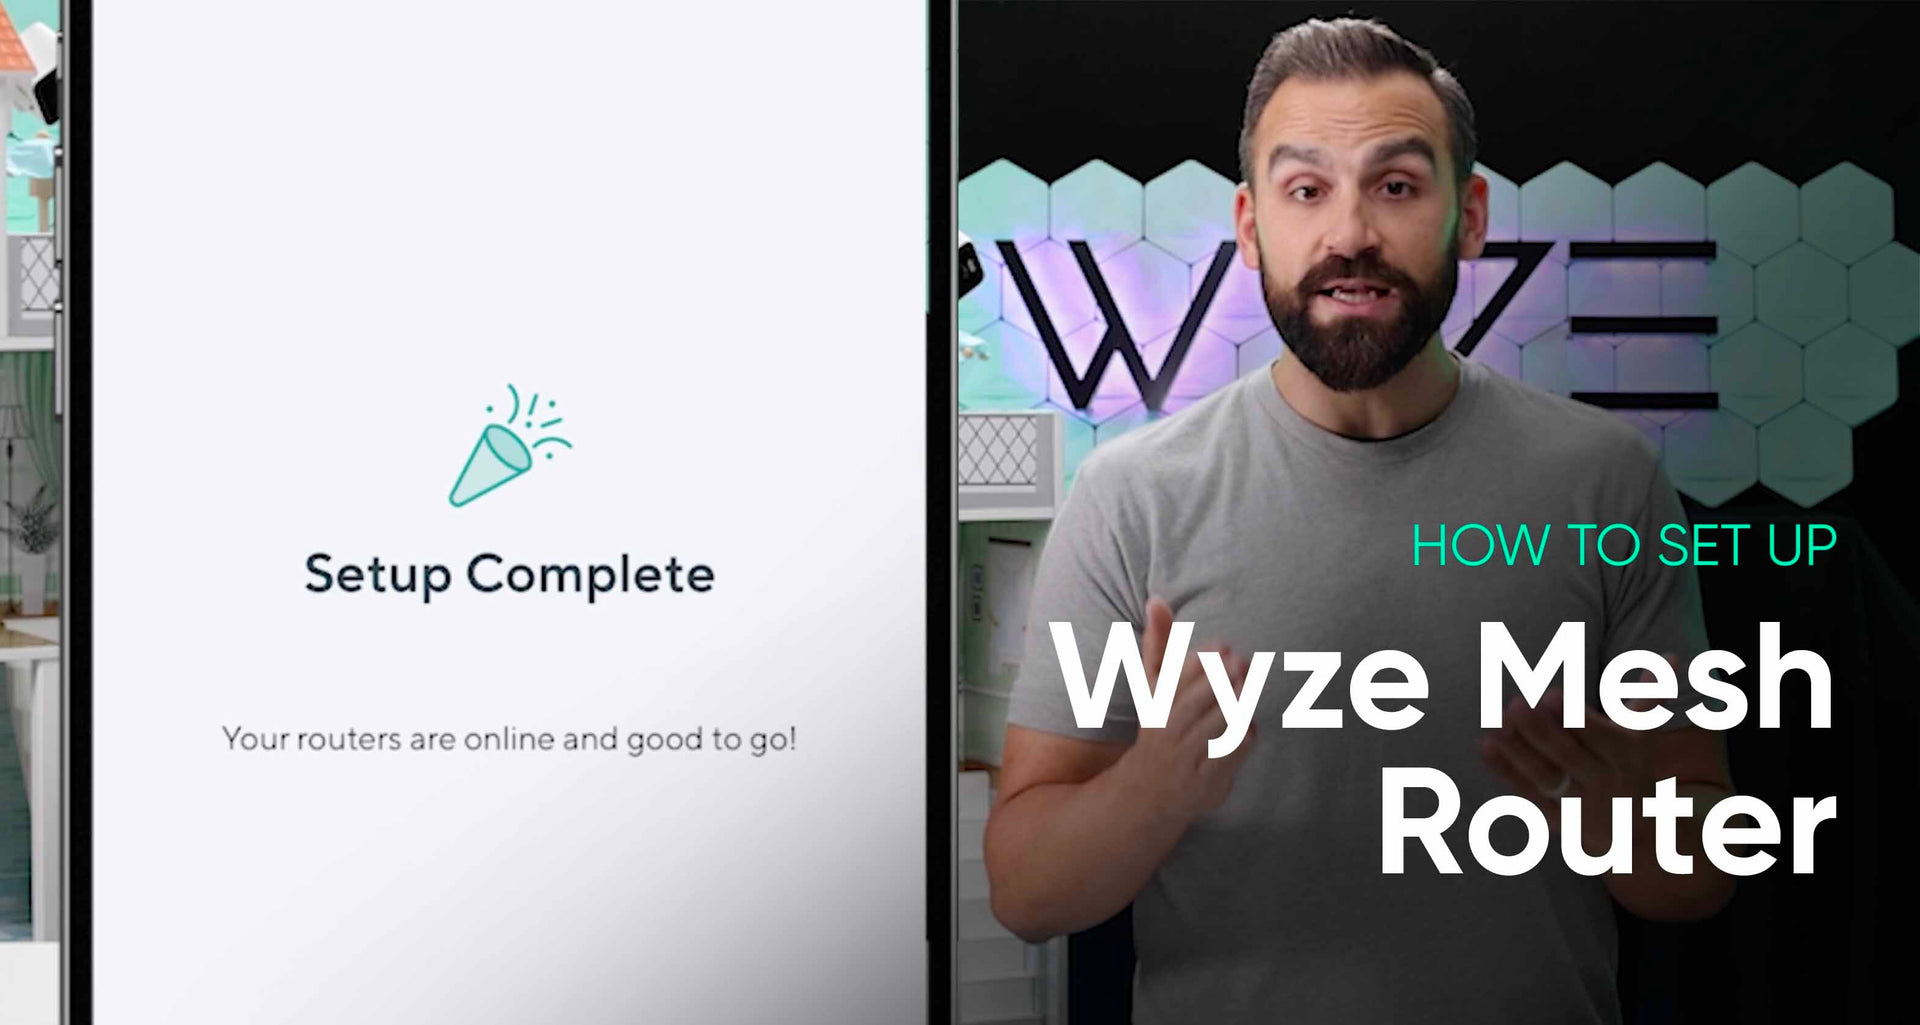 Load video: Get walked step by step through the Wyze Mesh Router set up process.